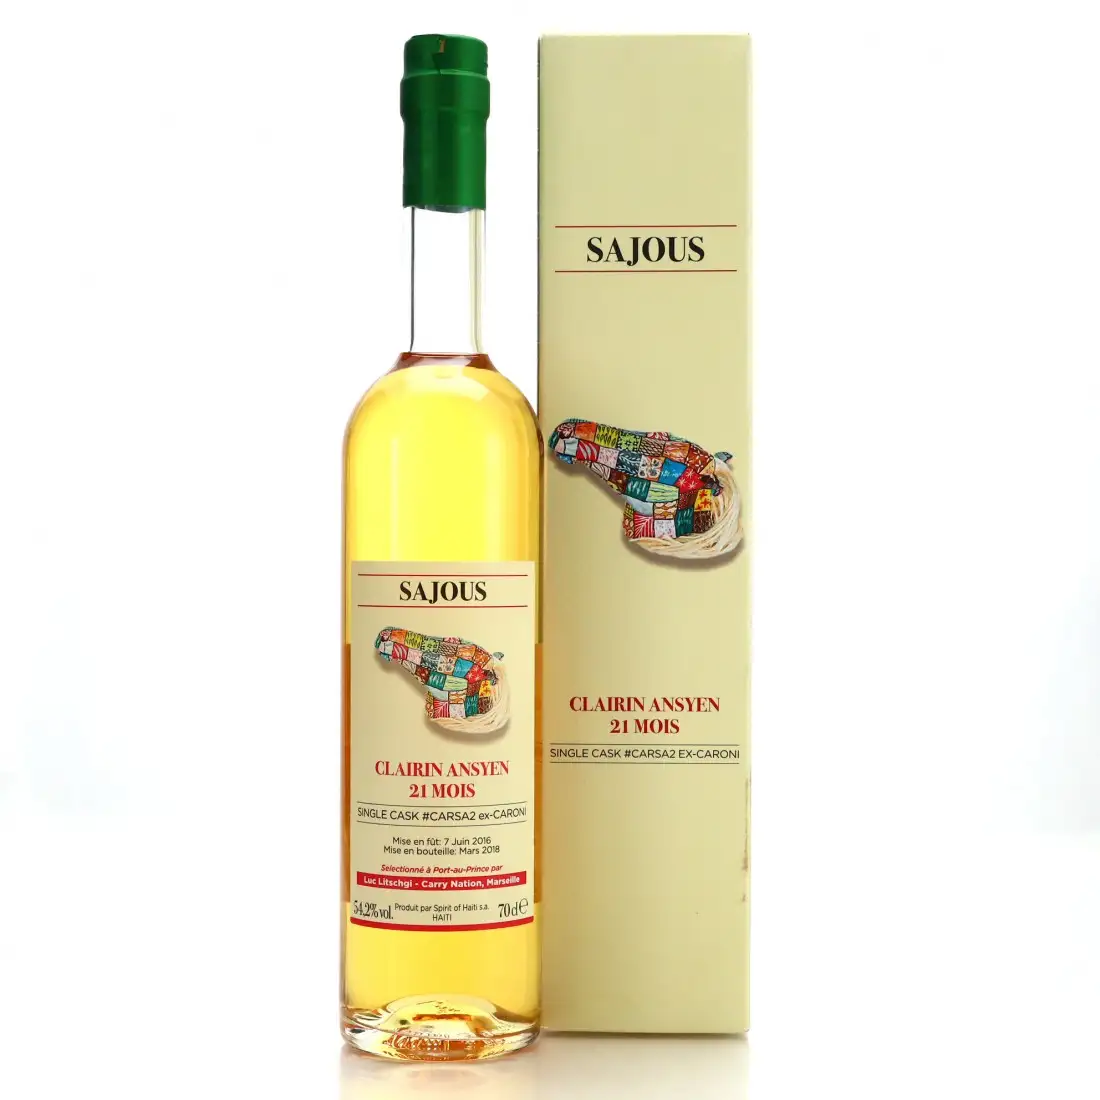 Image of the front of the bottle of the rum Clairin Ansyen Sajous (Caroni Cask)